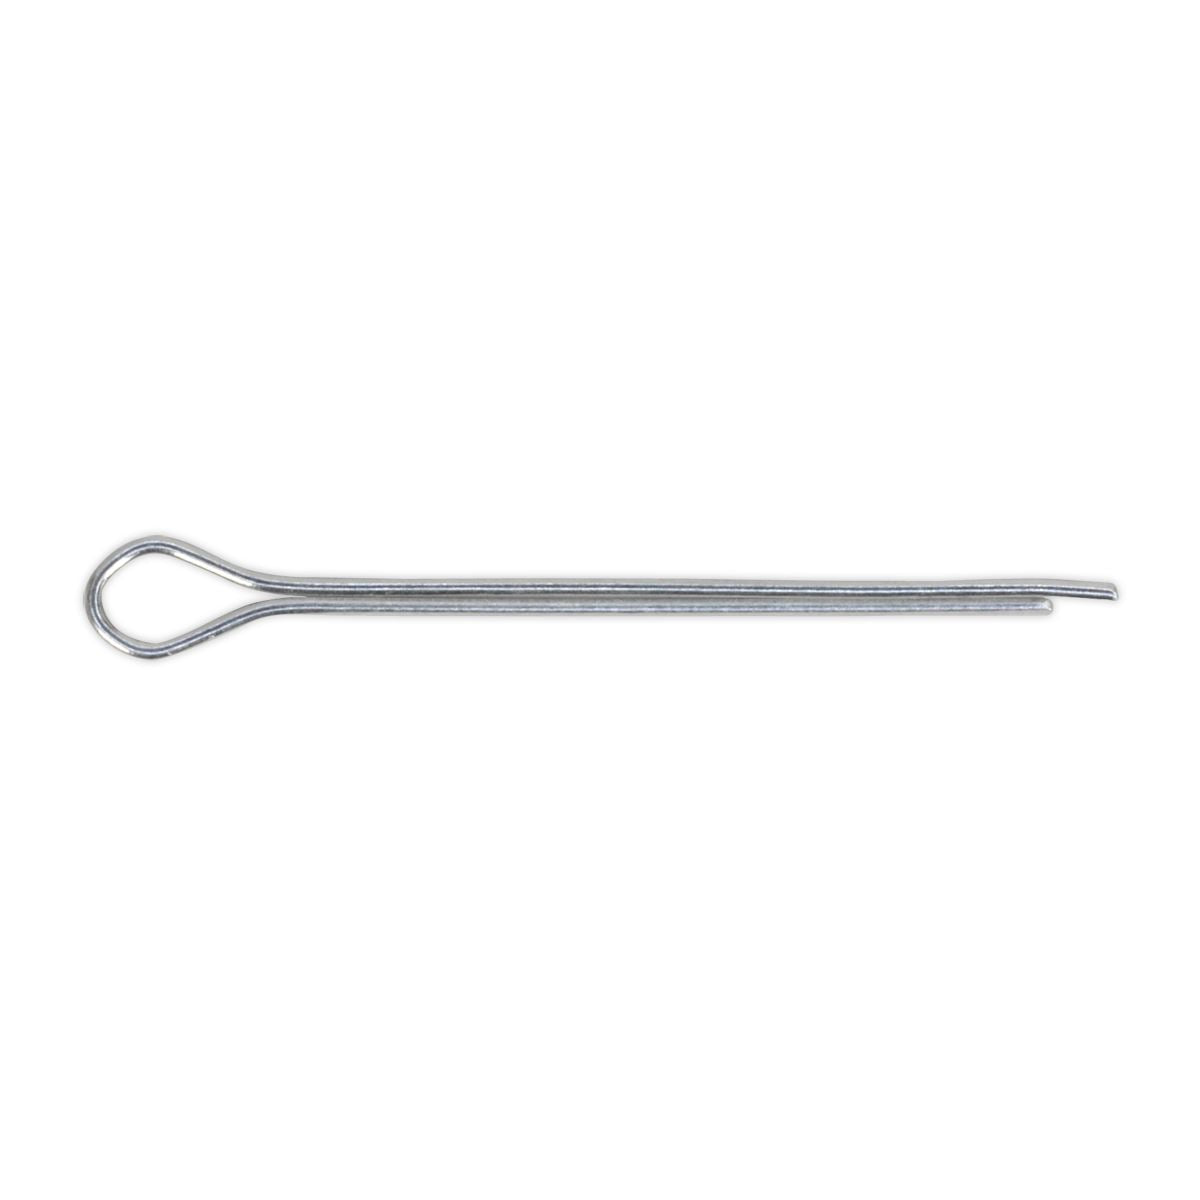 Sealey Split Pin 1.6 x 25mm Pack of 100